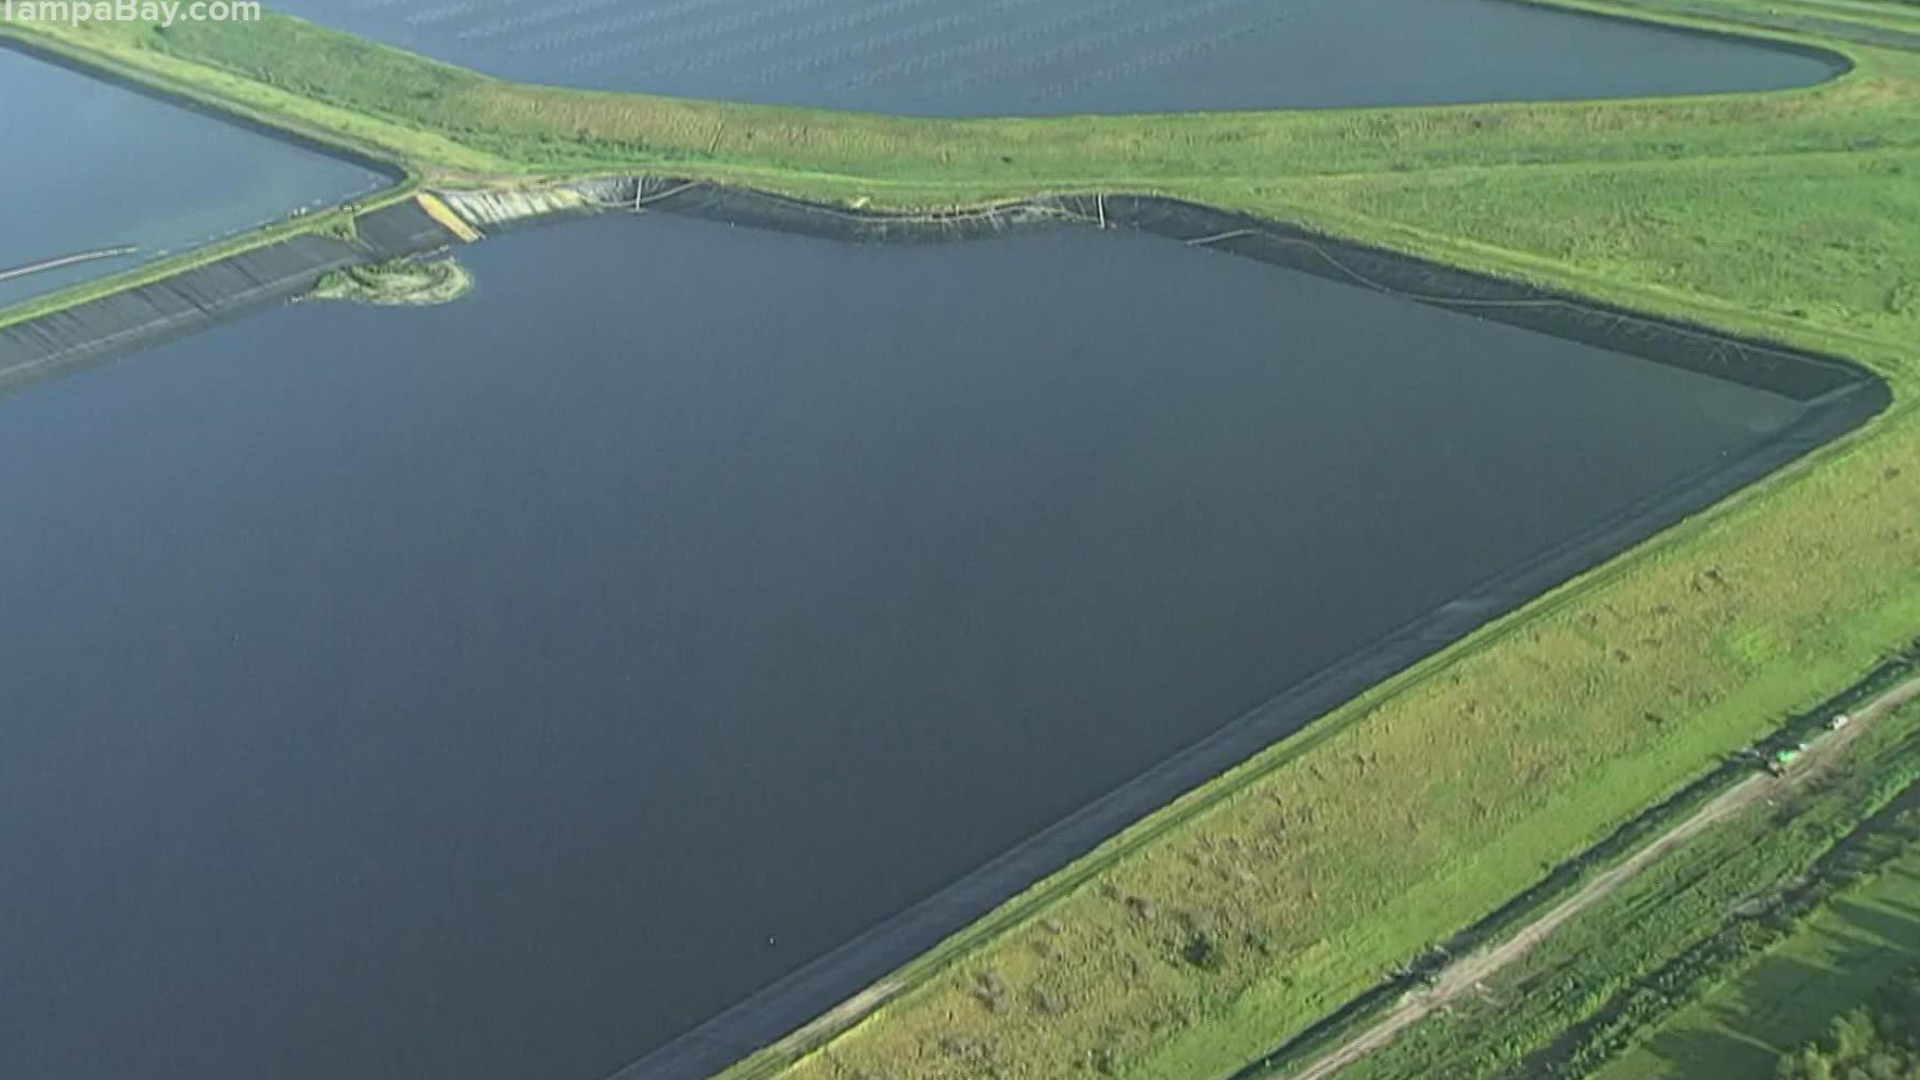 The facility's reservoir has received around 169 million gallons of rainwater, the state says.